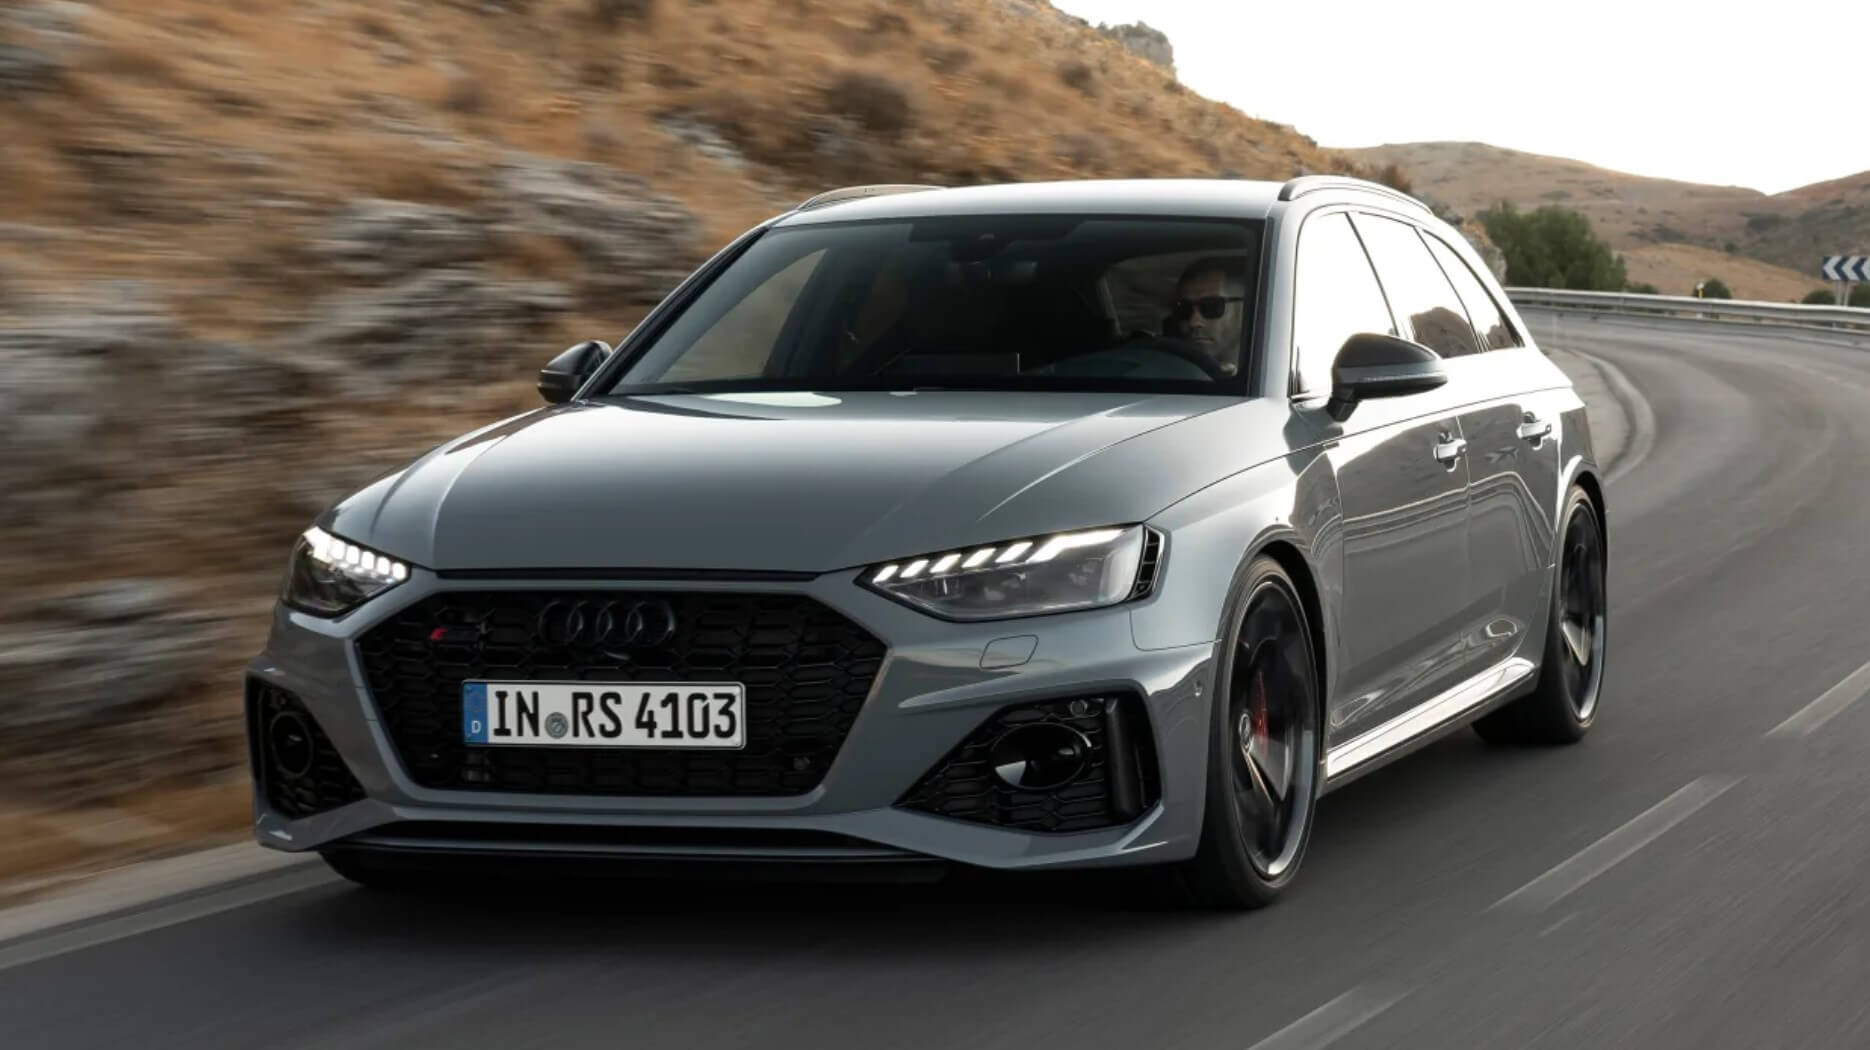 The new Audi RS4 Avant packs 450 horses which gallop for 12.4 kms on a  litre of petrol | Motoroids